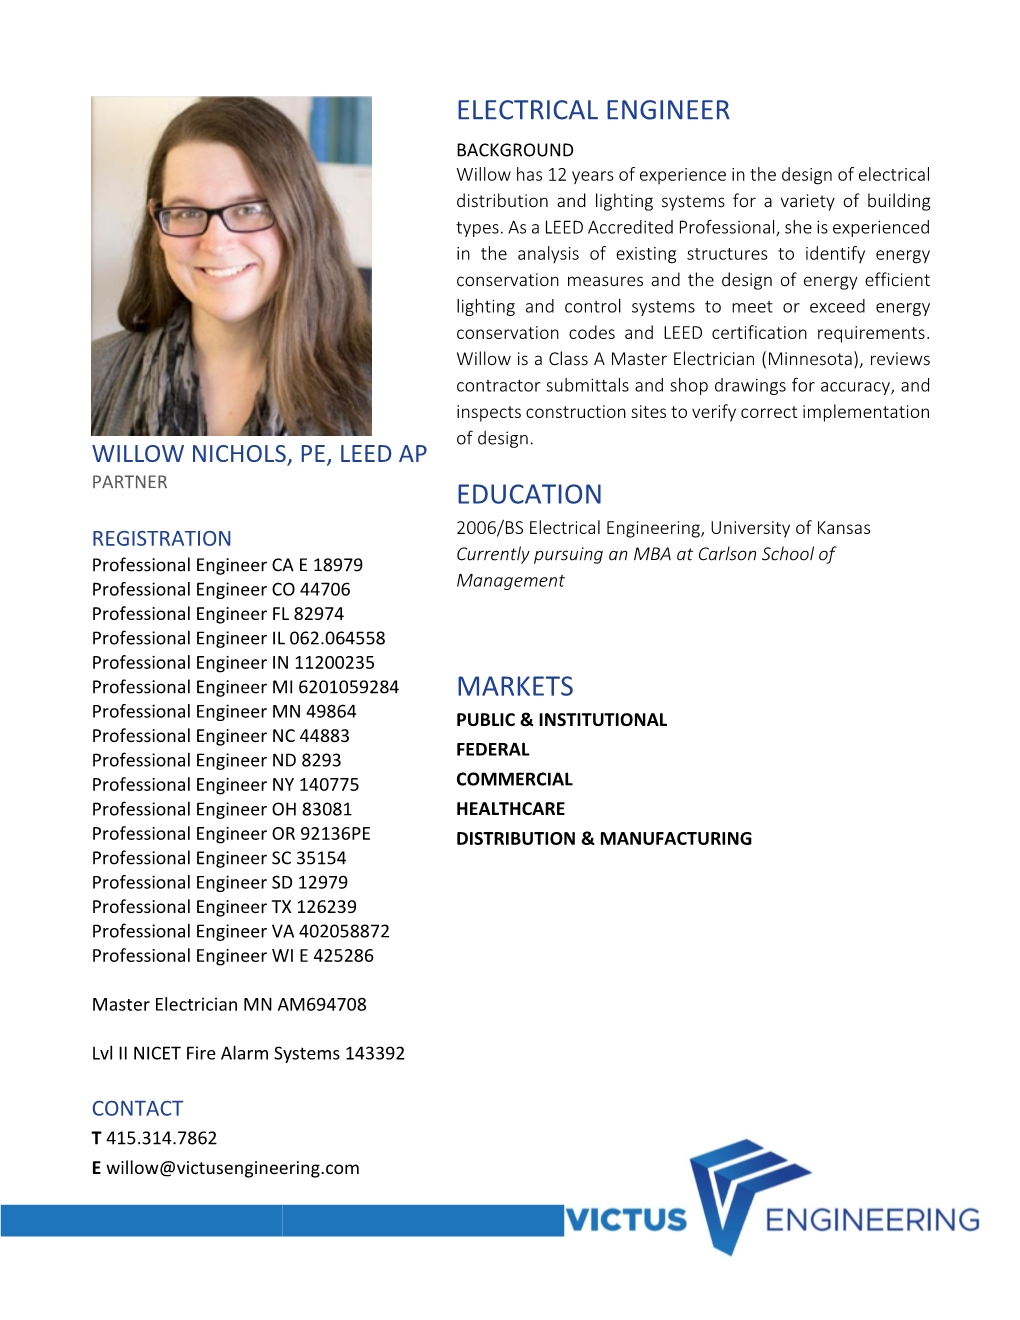 Electrical Engineer Education Markets